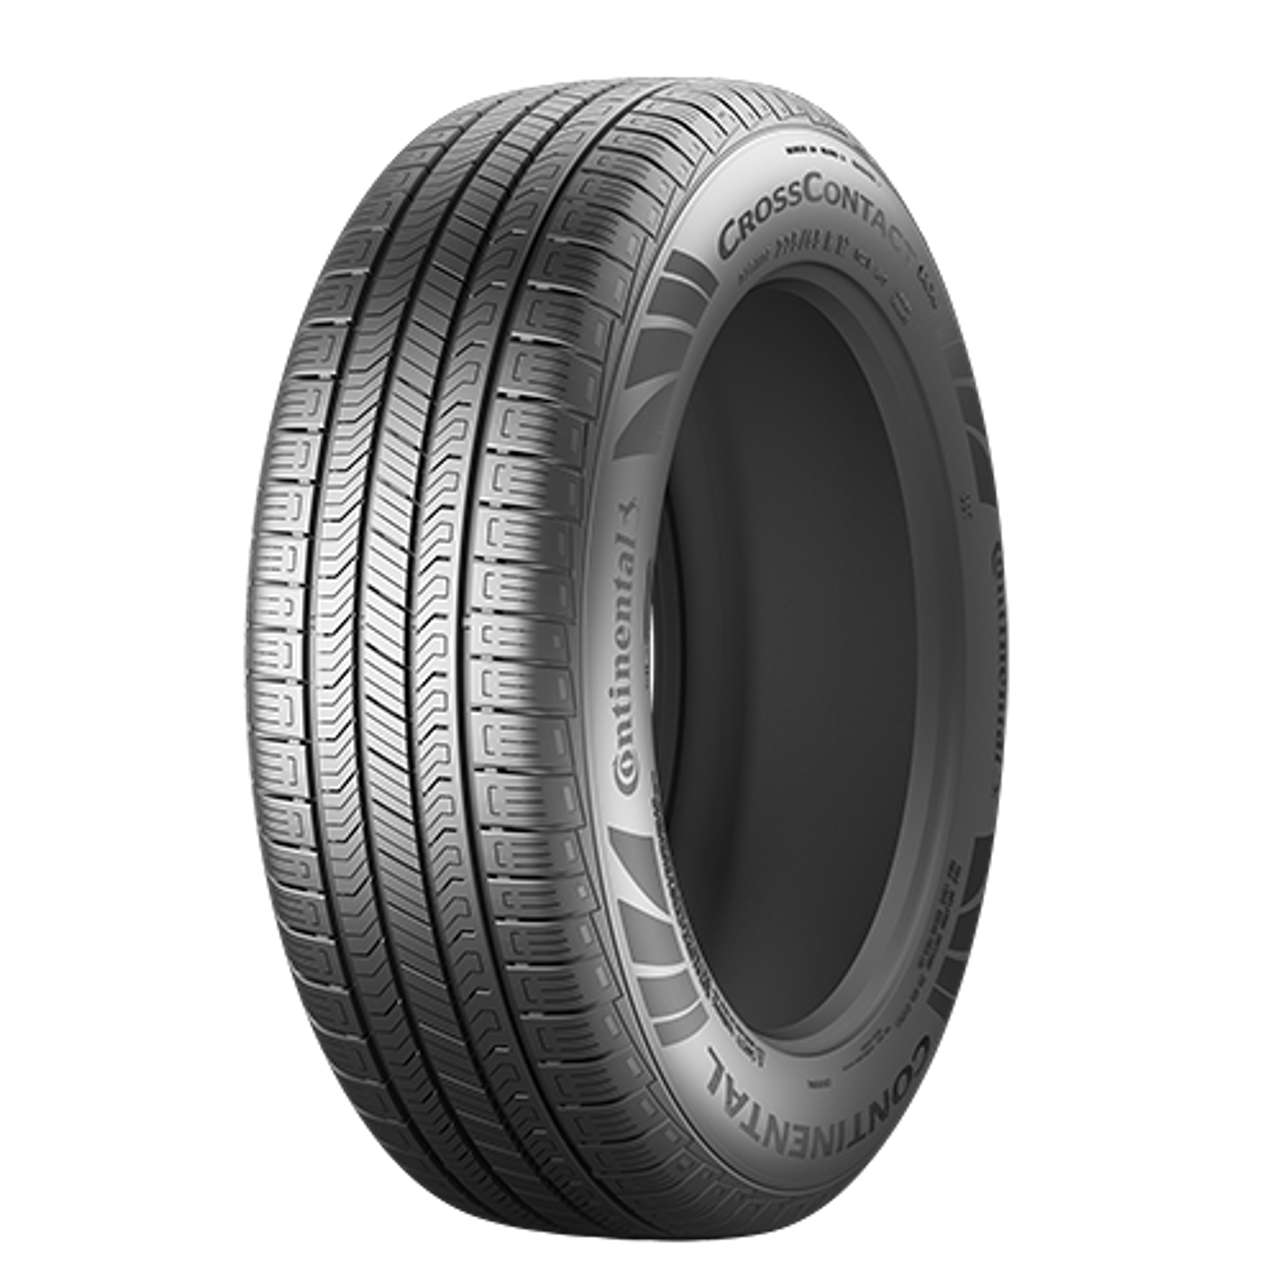 CONTINENTAL CROSSCONTACT RX (EVc) 235/60R18 103H FR BSW